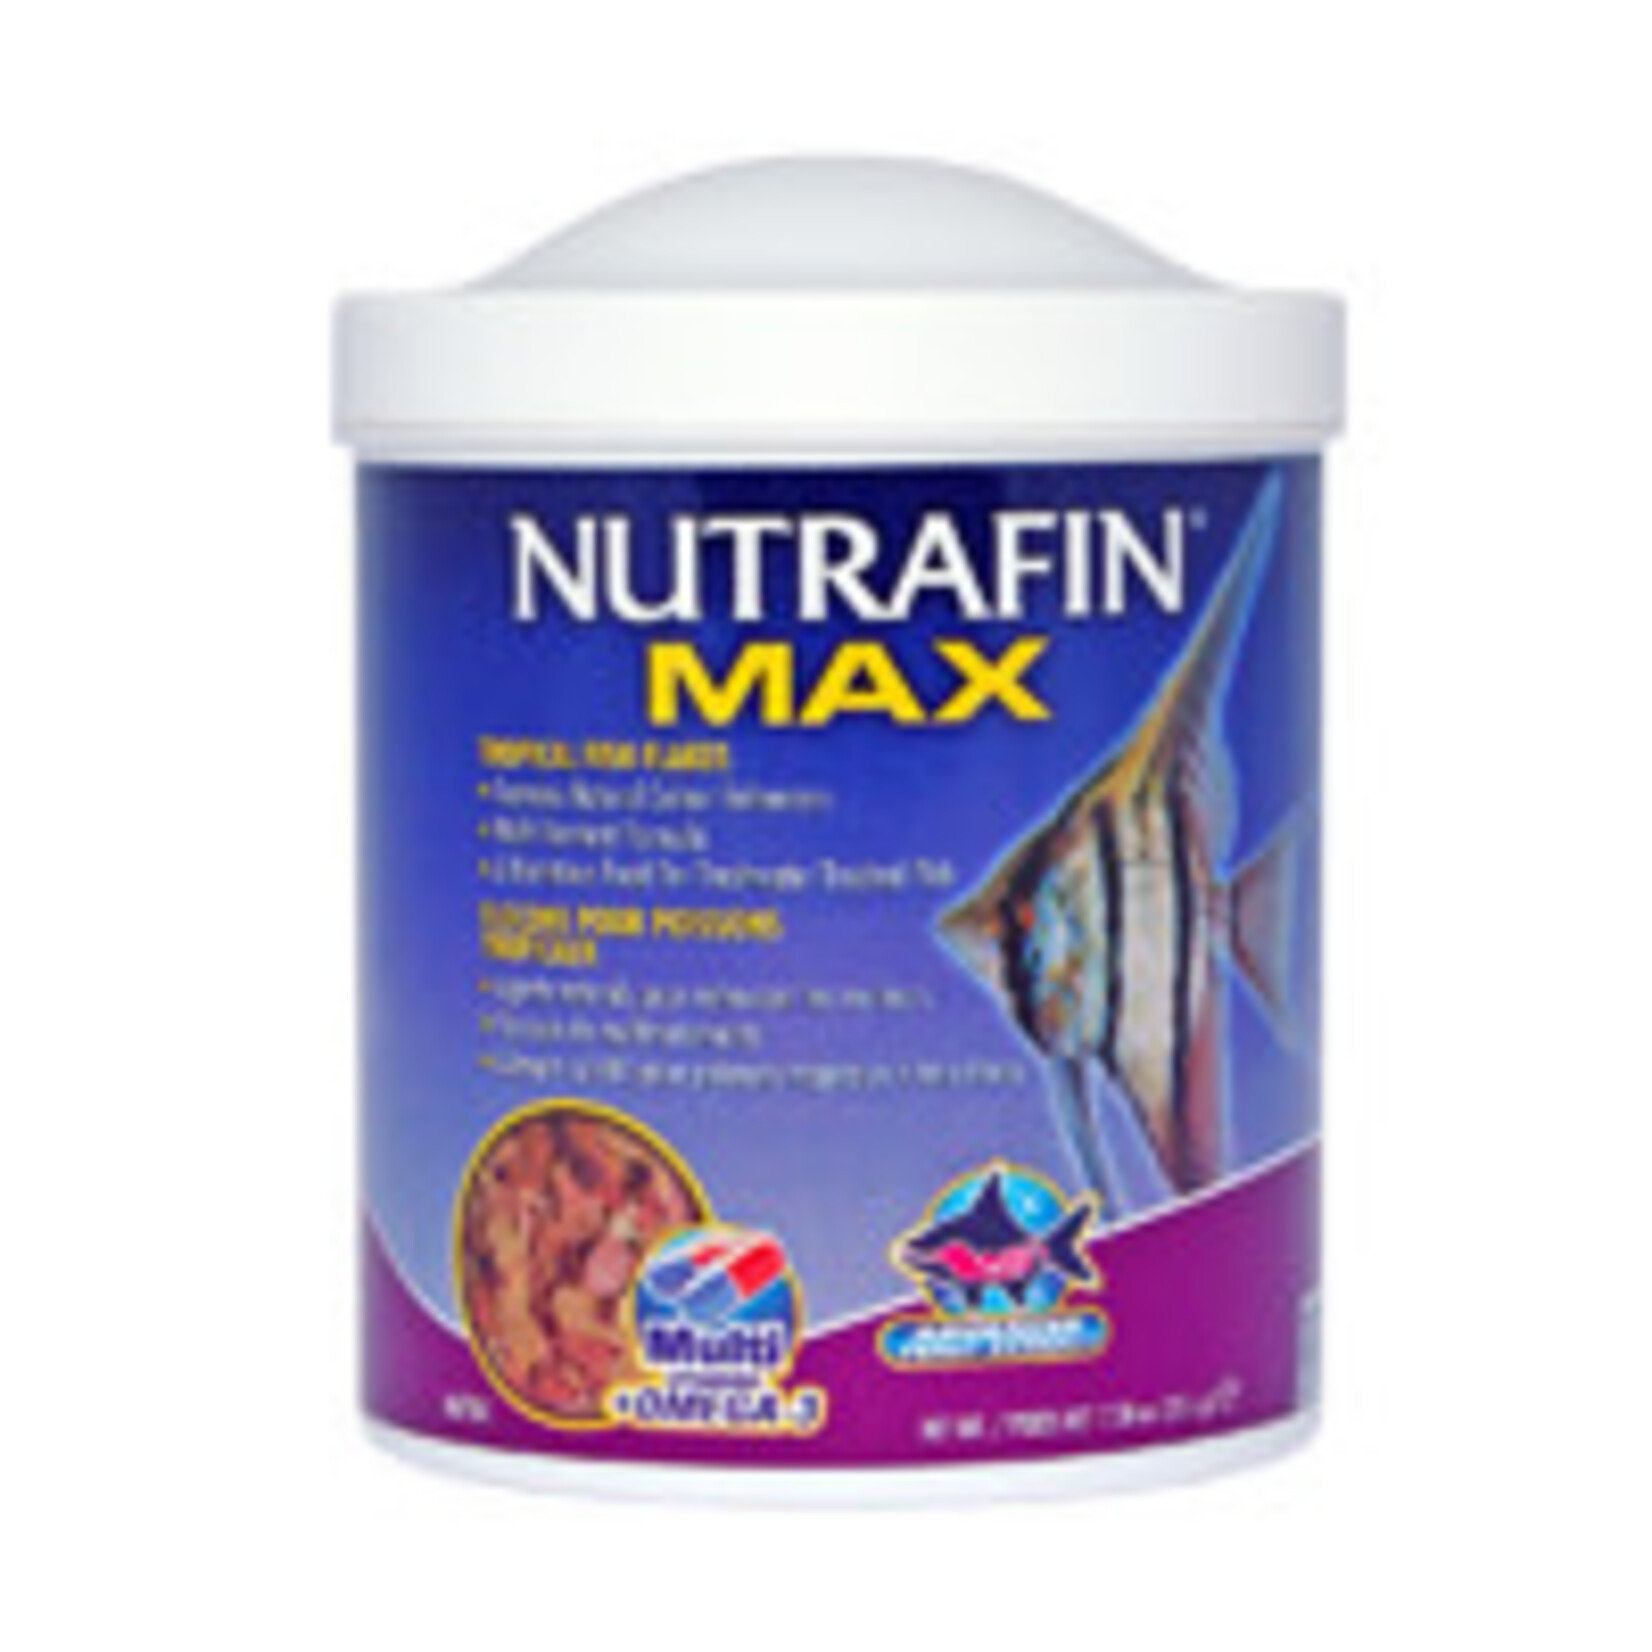 NUTRAFIN NUTRAFIN MAX FLOCONS POUR POISSONS TROPICAUX 215 G